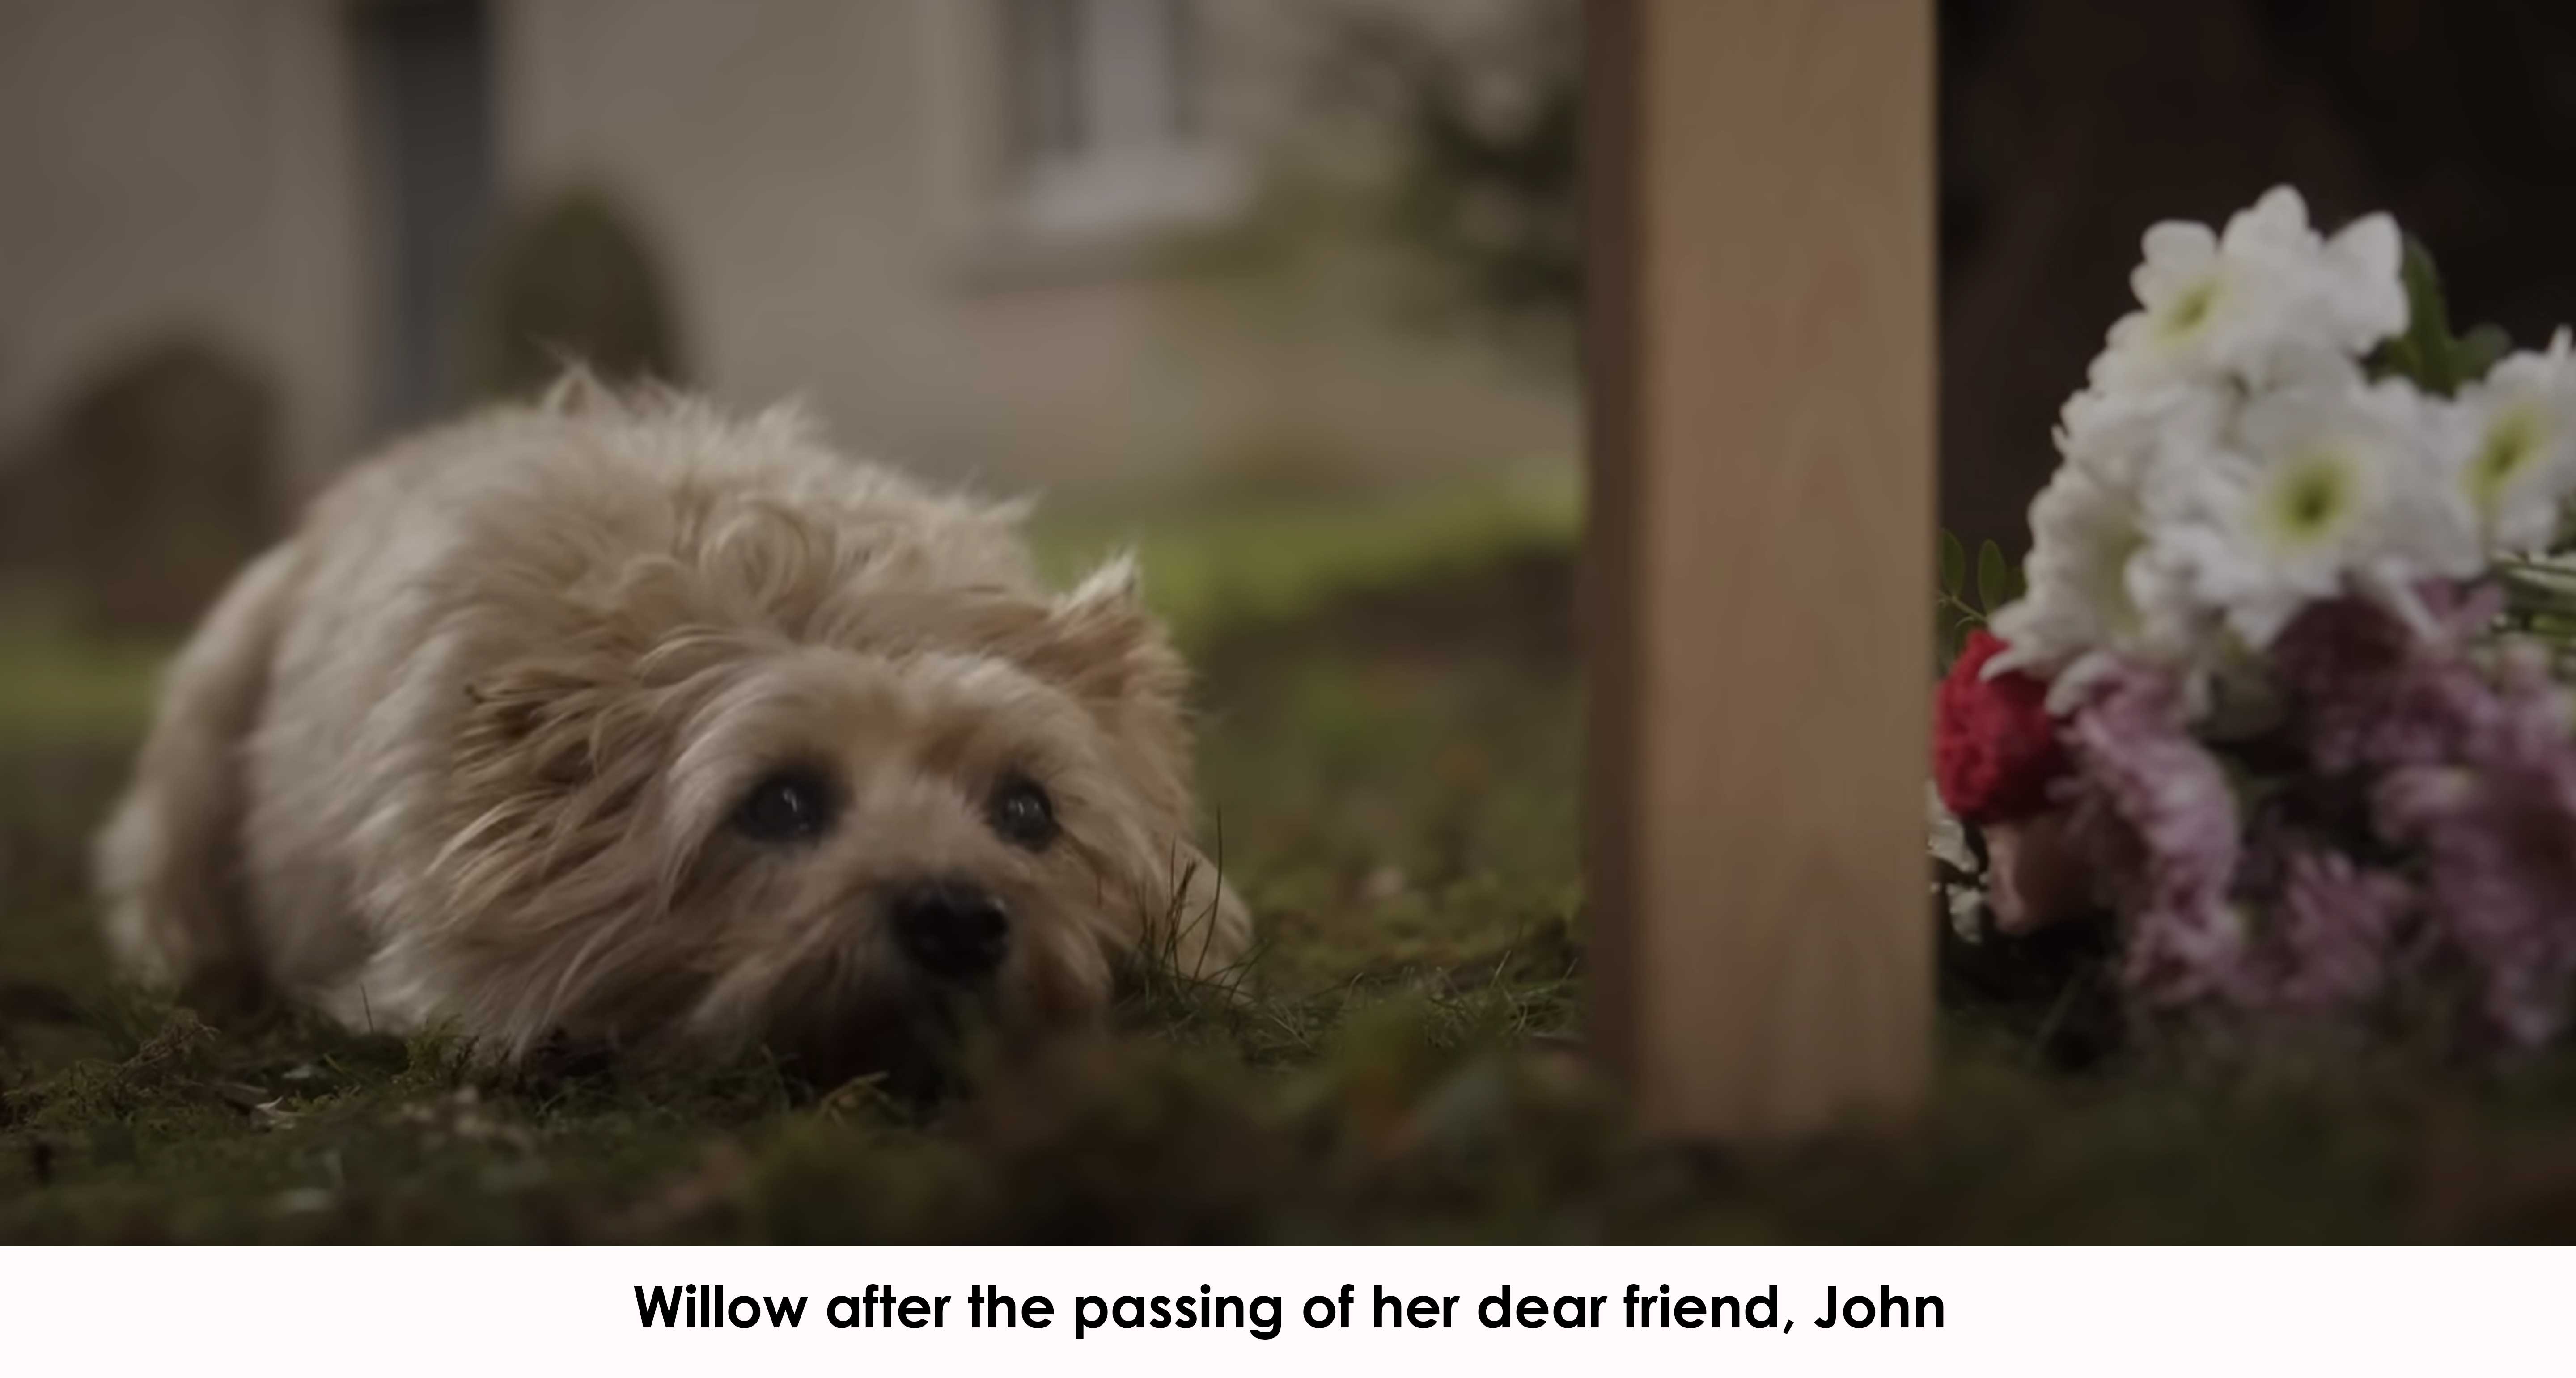 Willow after the passing of her dead friend, John